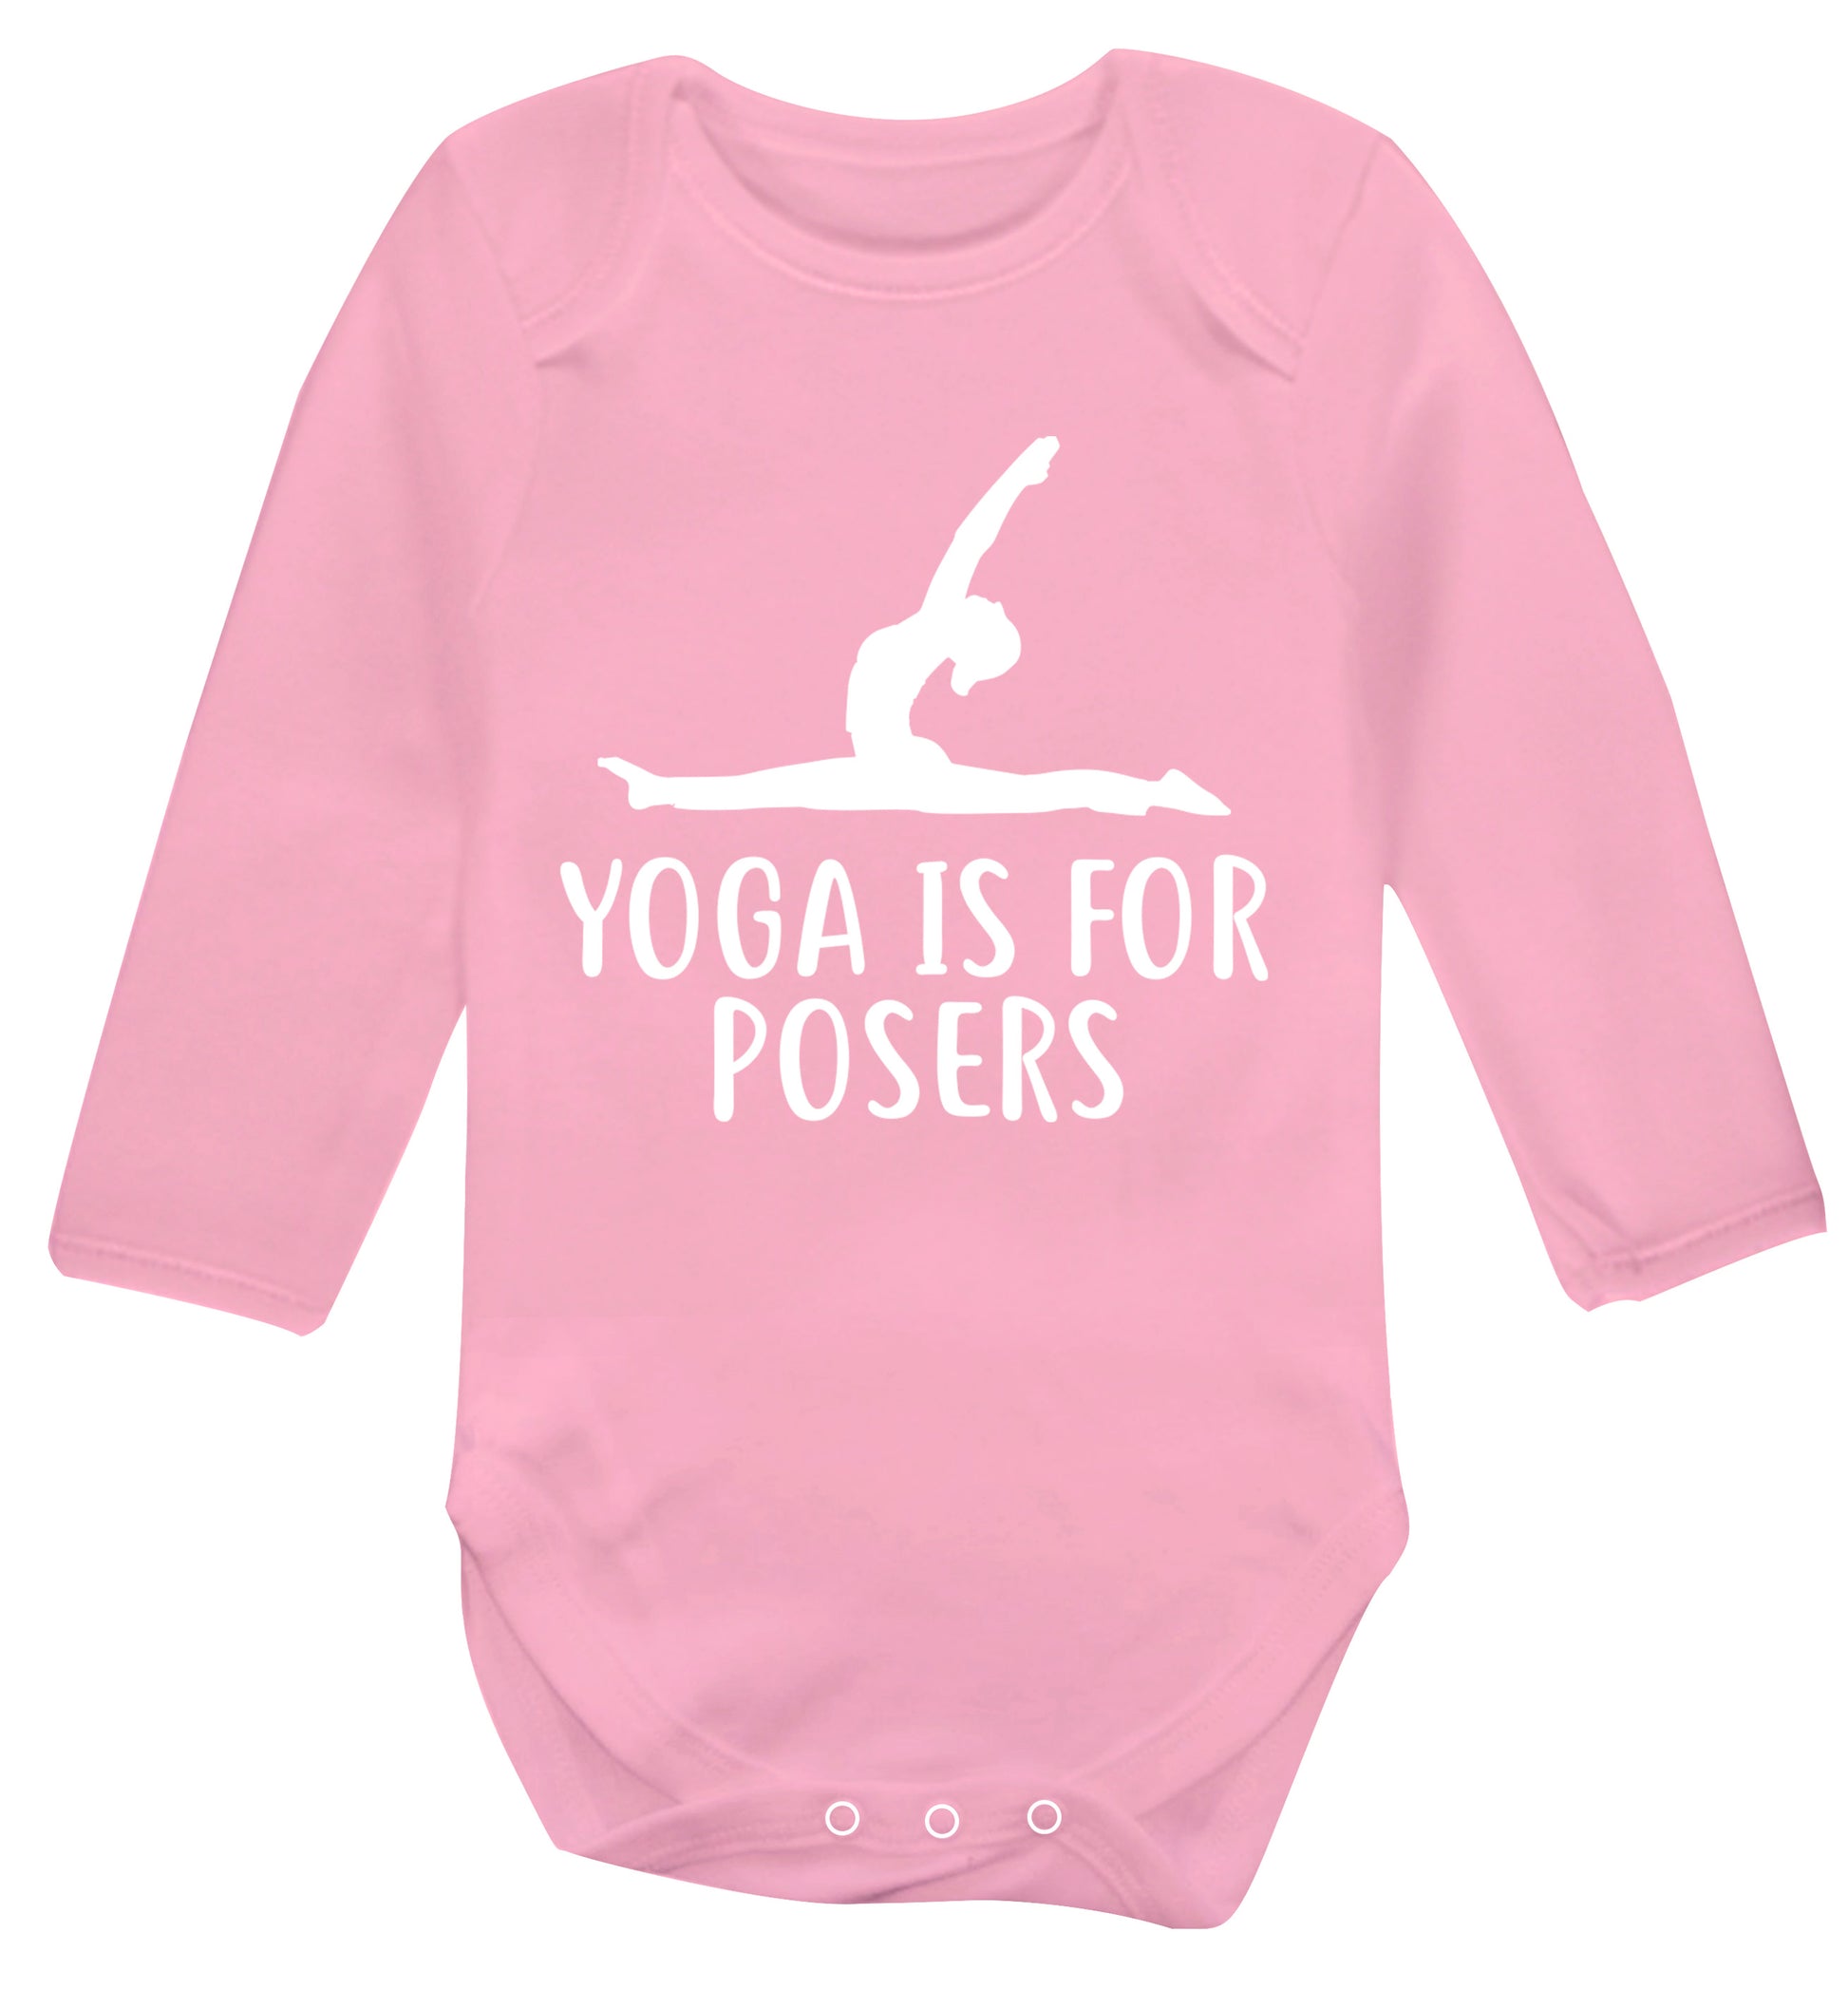 Yoga is for posers Baby Vest long sleeved pale pink 6-12 months